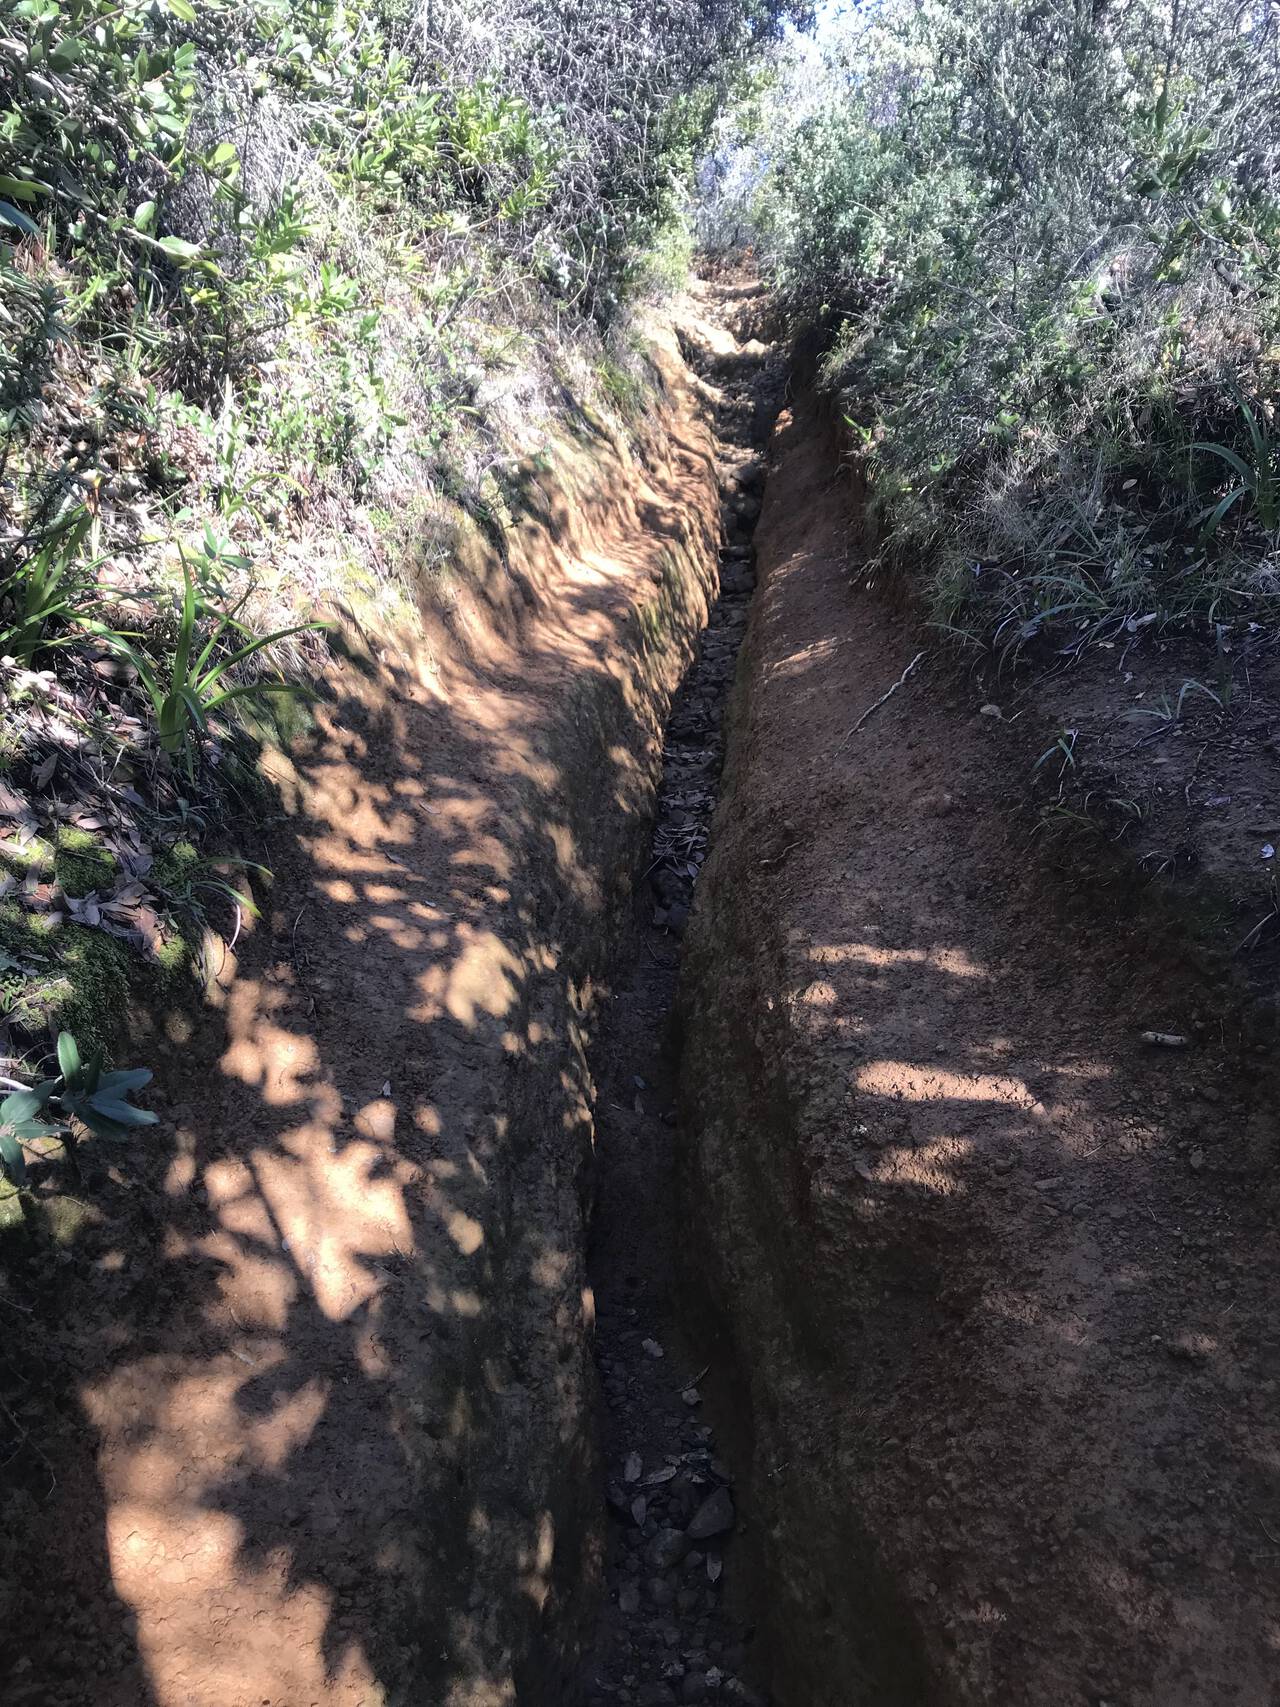 The heavily rutted Temelpa trail